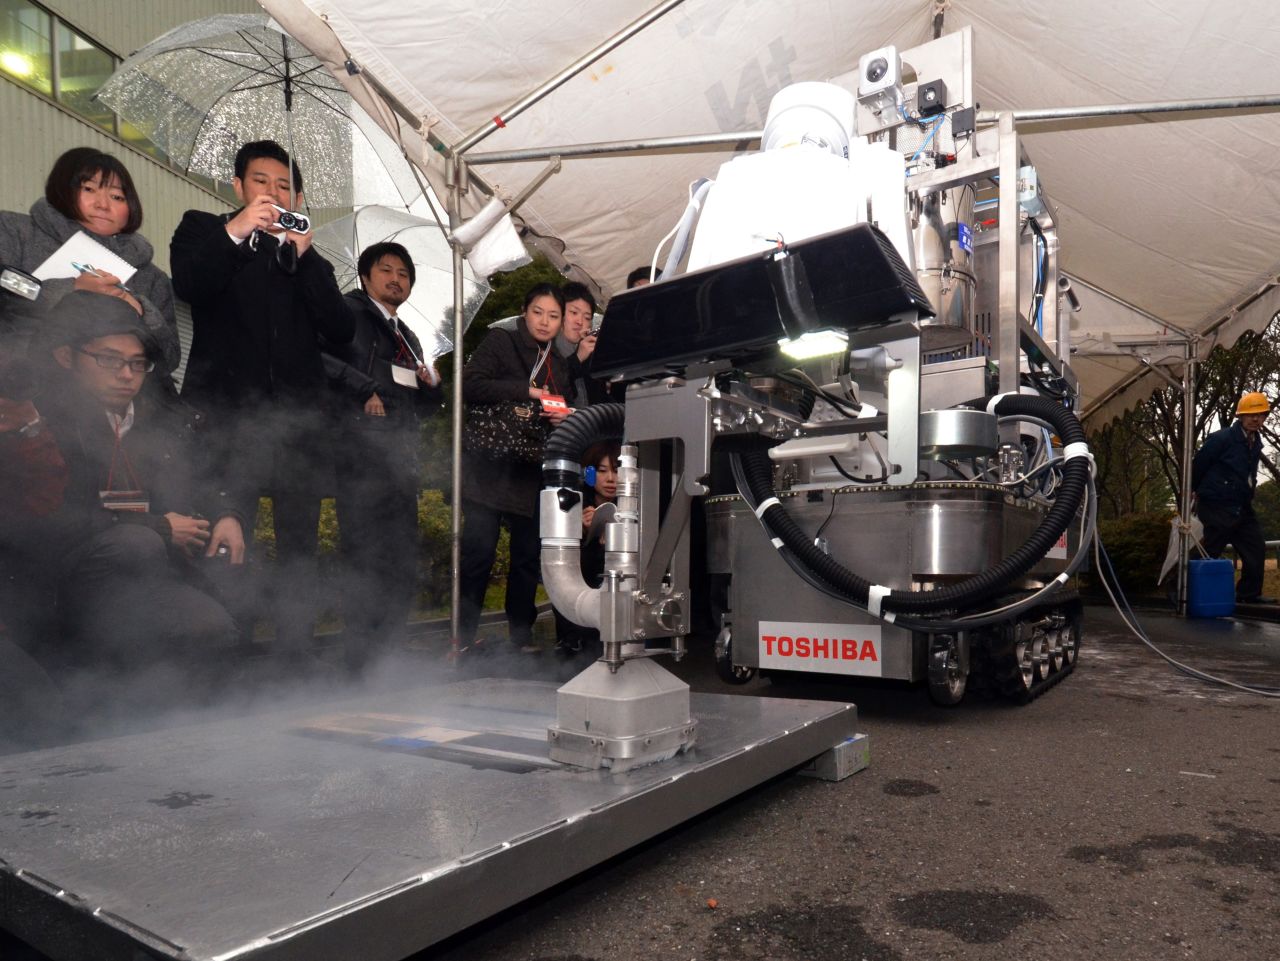 This Toshiba decontamination robot blasts dry ice particles against contaminated floors or walls and can be used to quickly and effectively clean up chemical spillages at nuclear plants. 